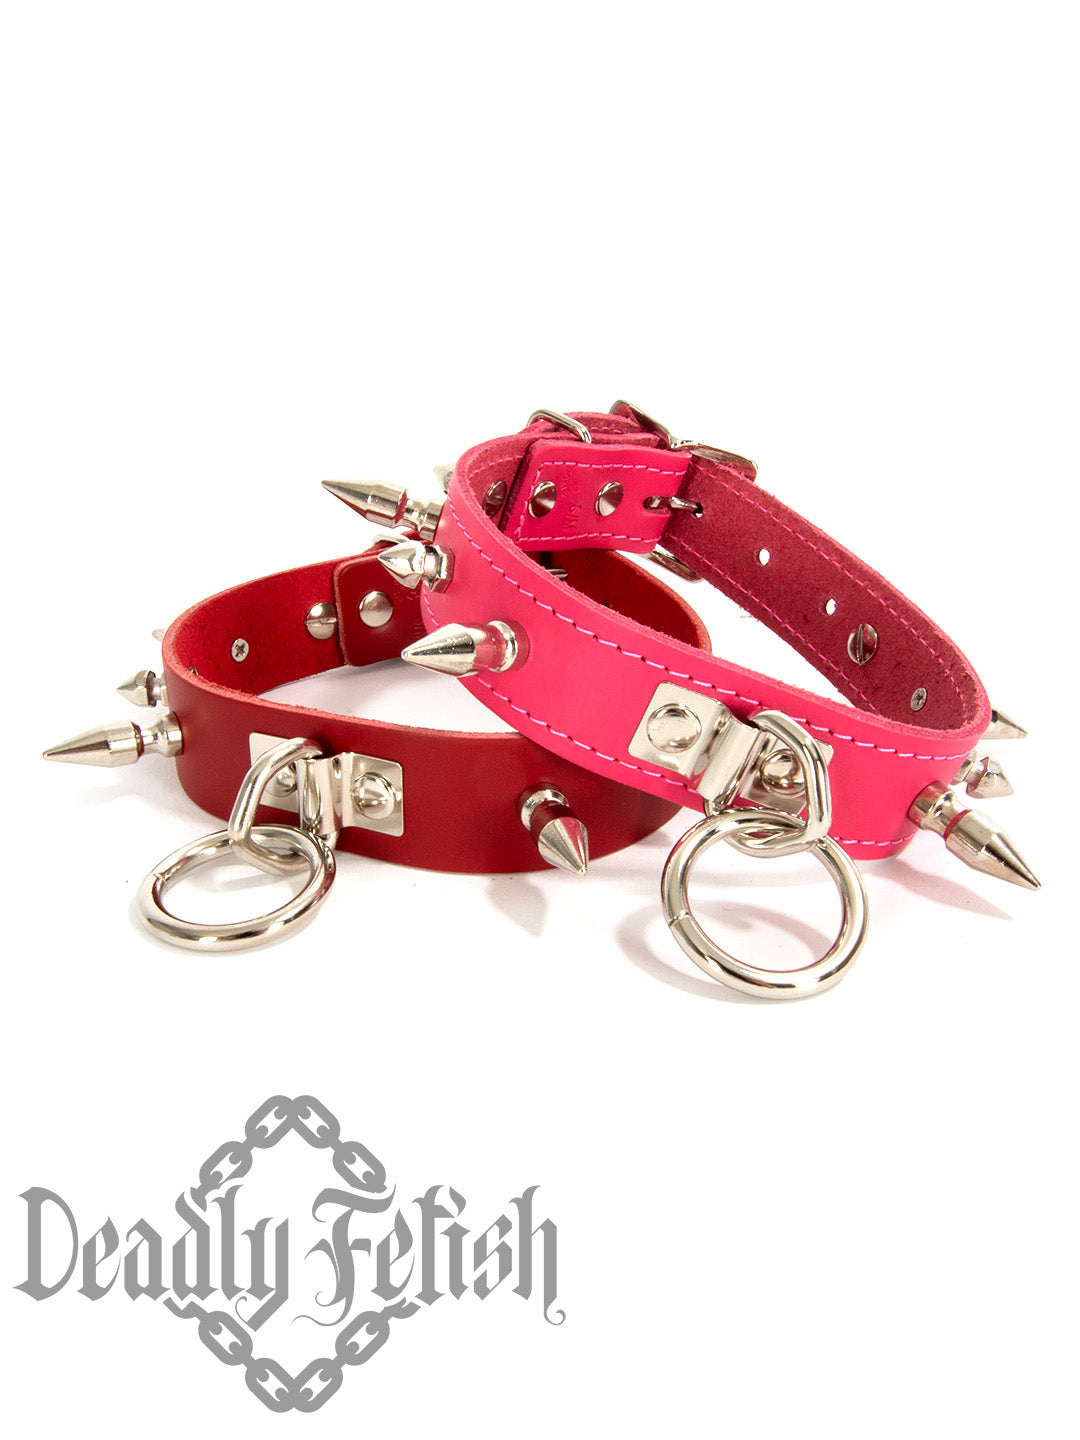 Deadly Fetish Leather: Collar #09